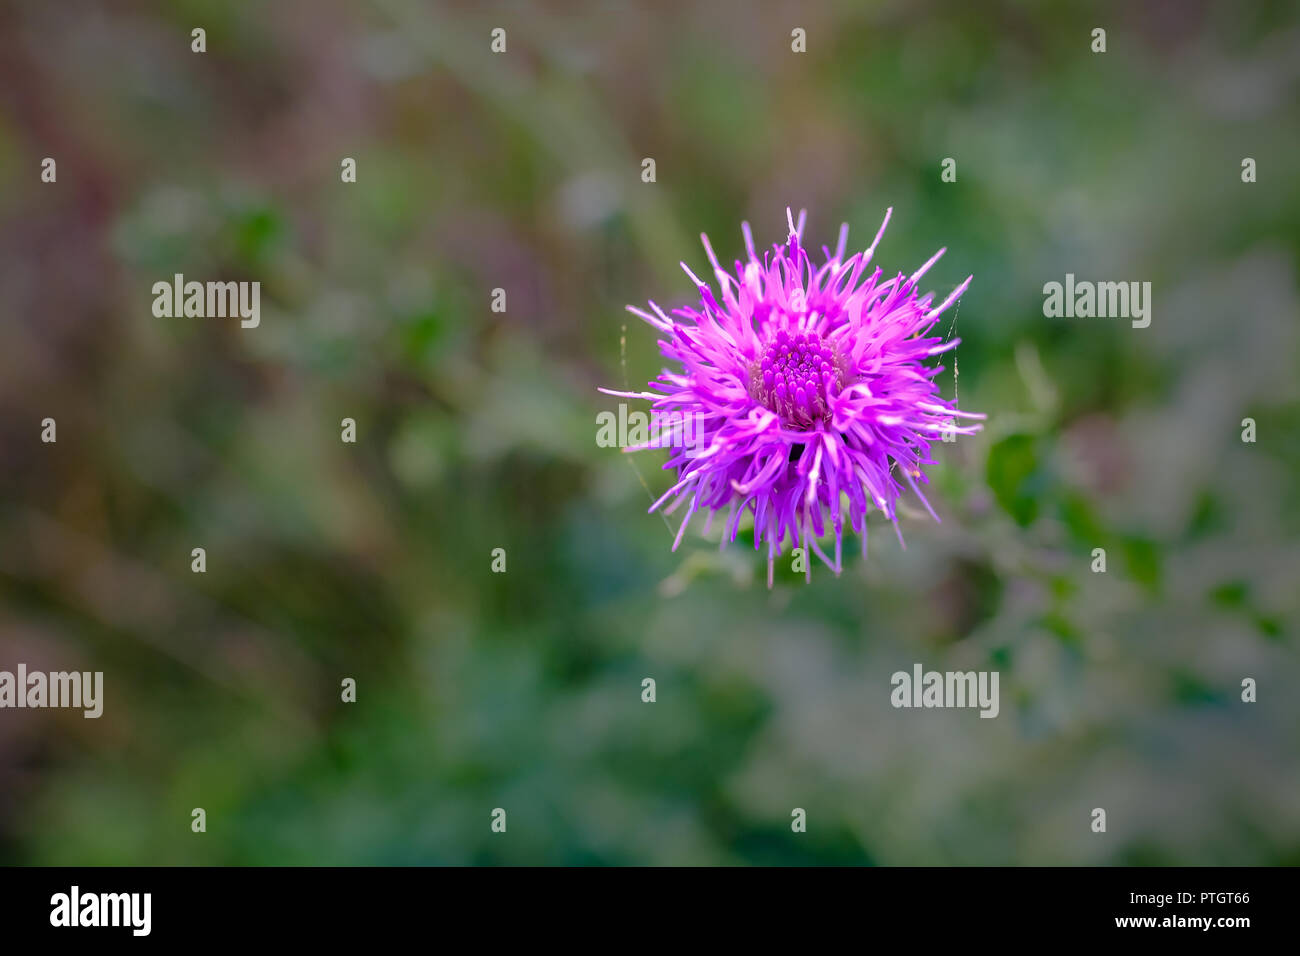 Close up of beautiful purple pink thistle flower, shown on the third with a difussed background. Stock Photo